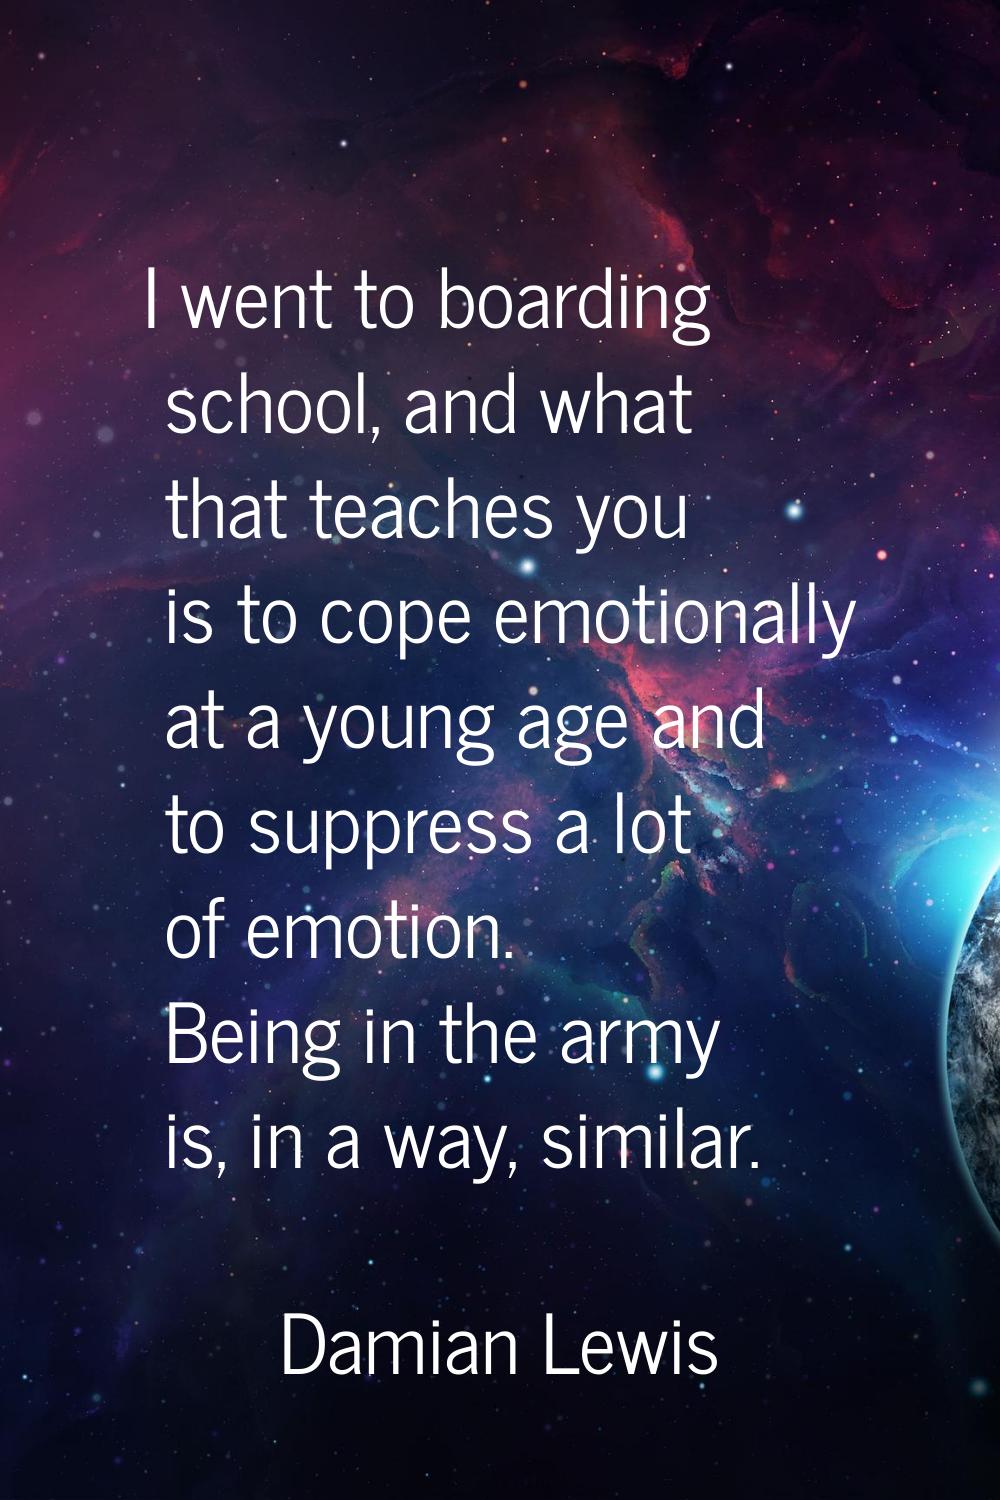 I went to boarding school, and what that teaches you is to cope emotionally at a young age and to s